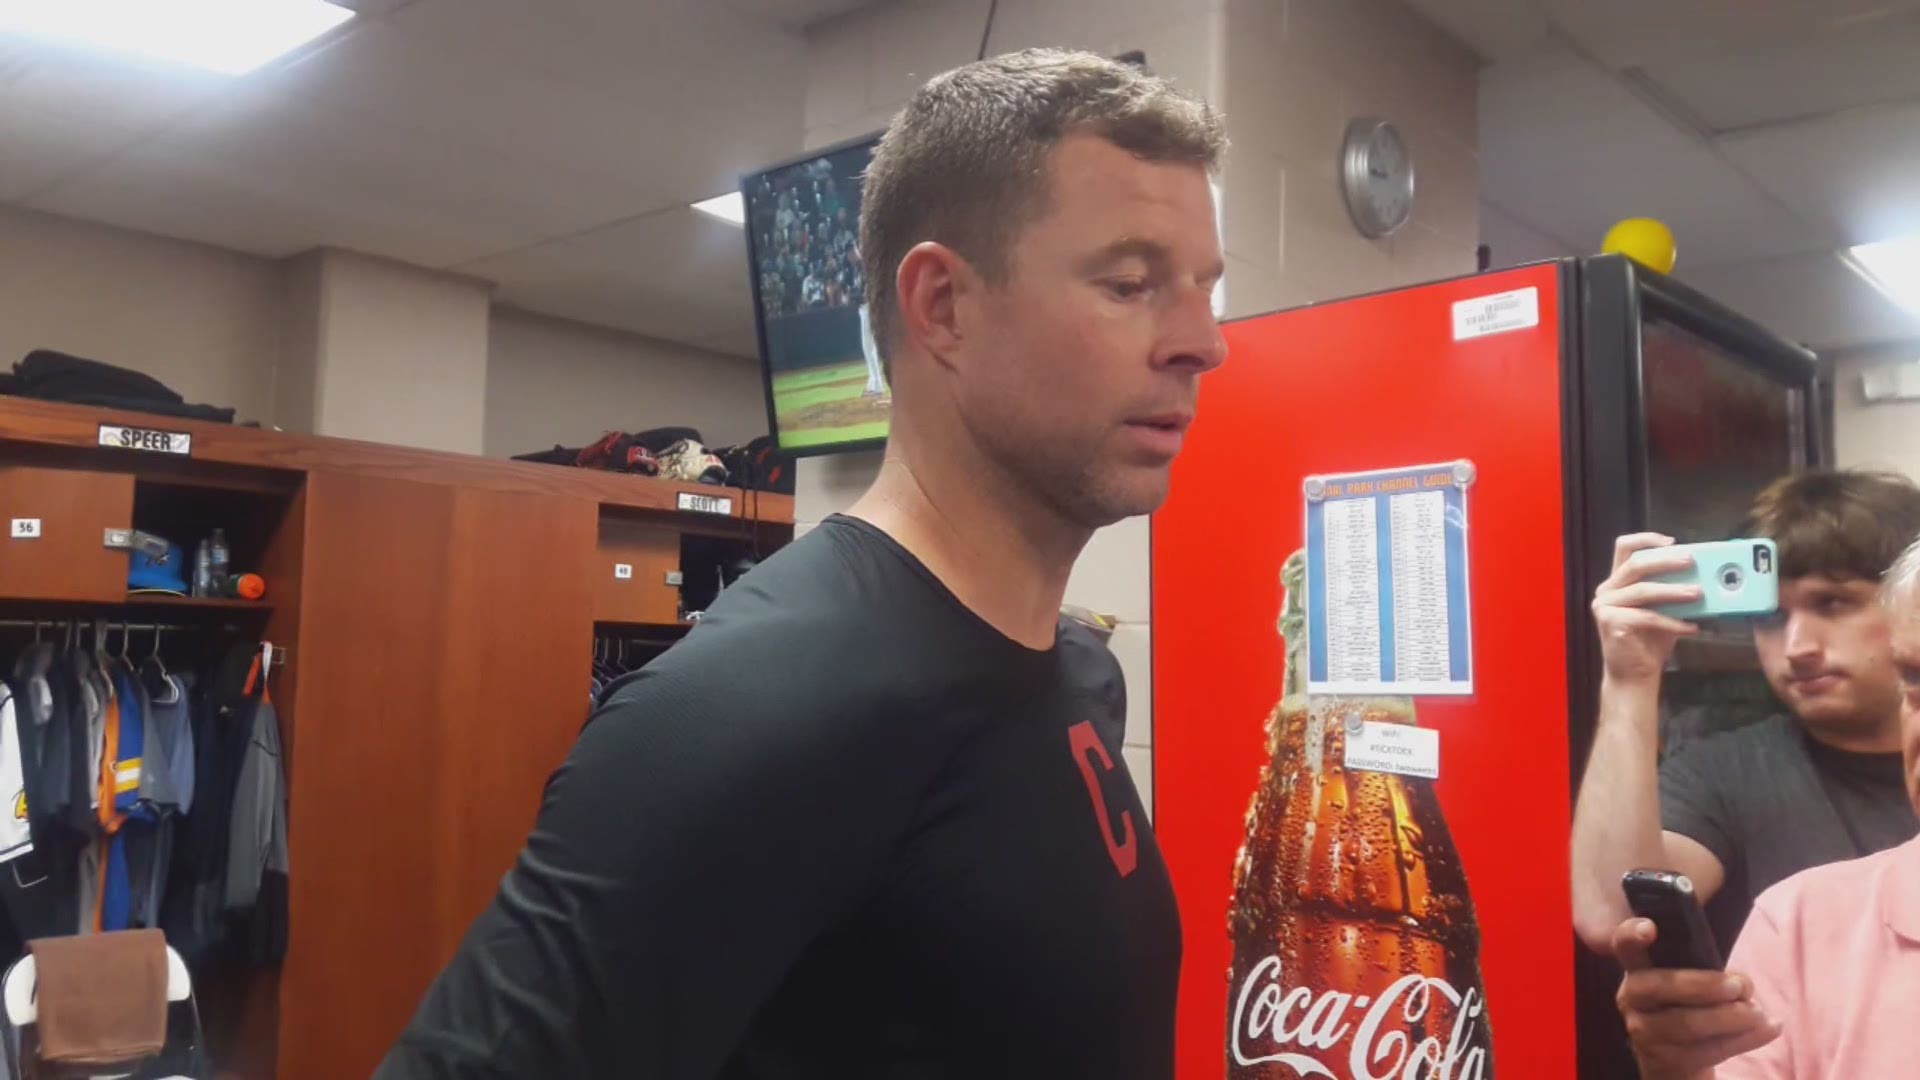 Following a rehab start for the Akron Rubber Ducks, Indians pitcher Corey Kluber talked with reporters about his outing. He allowed a run on two hits with six strikeouts in four innings.